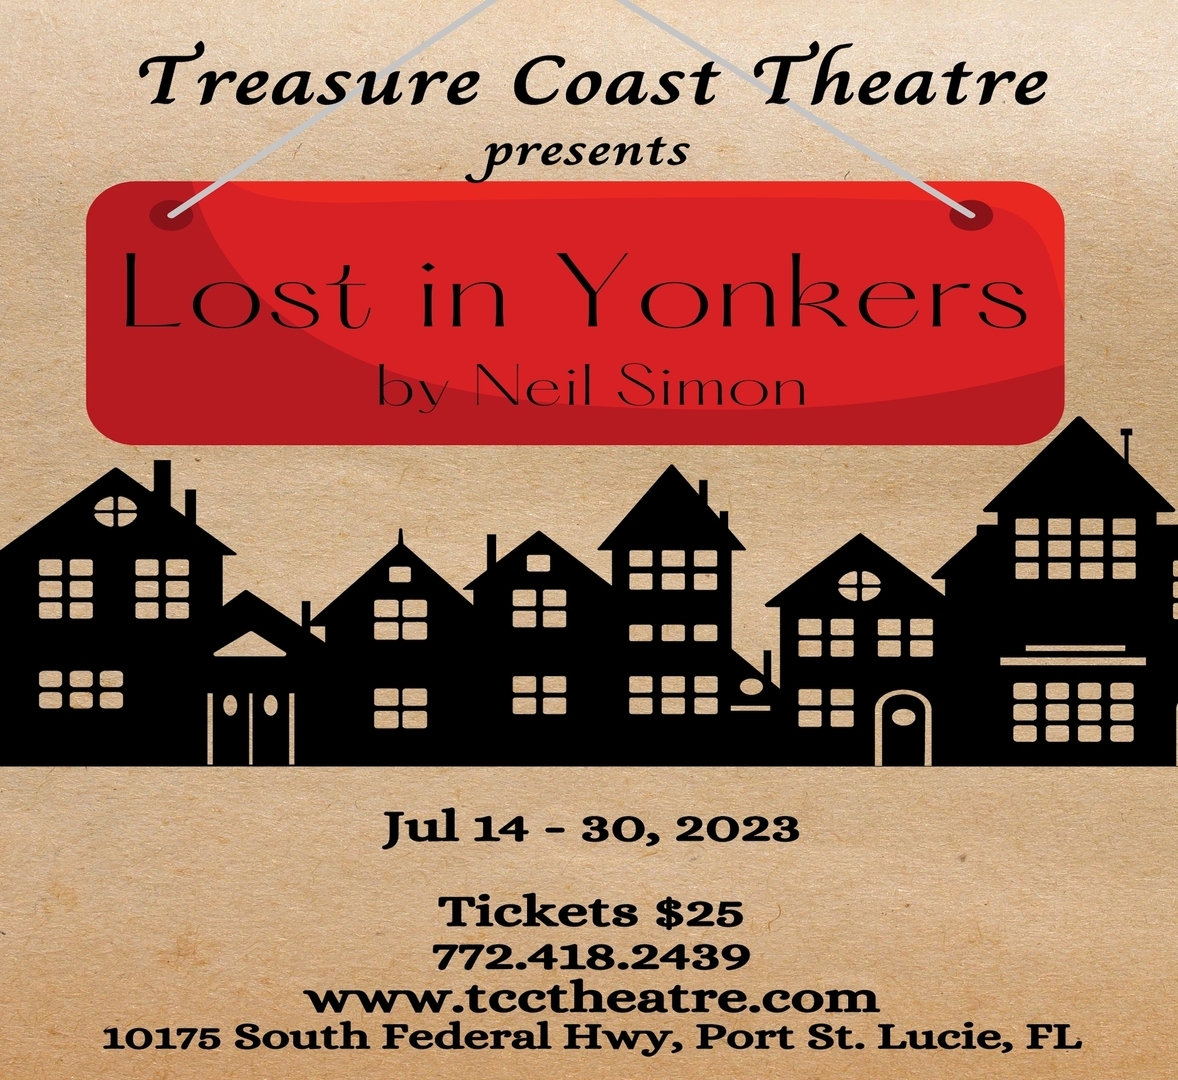 Treasure Coast Theatre presents the Tony Award and Pulitzer Prize winning comedy "Lost in Yonkers", Port St. Lucie, Florida, United States